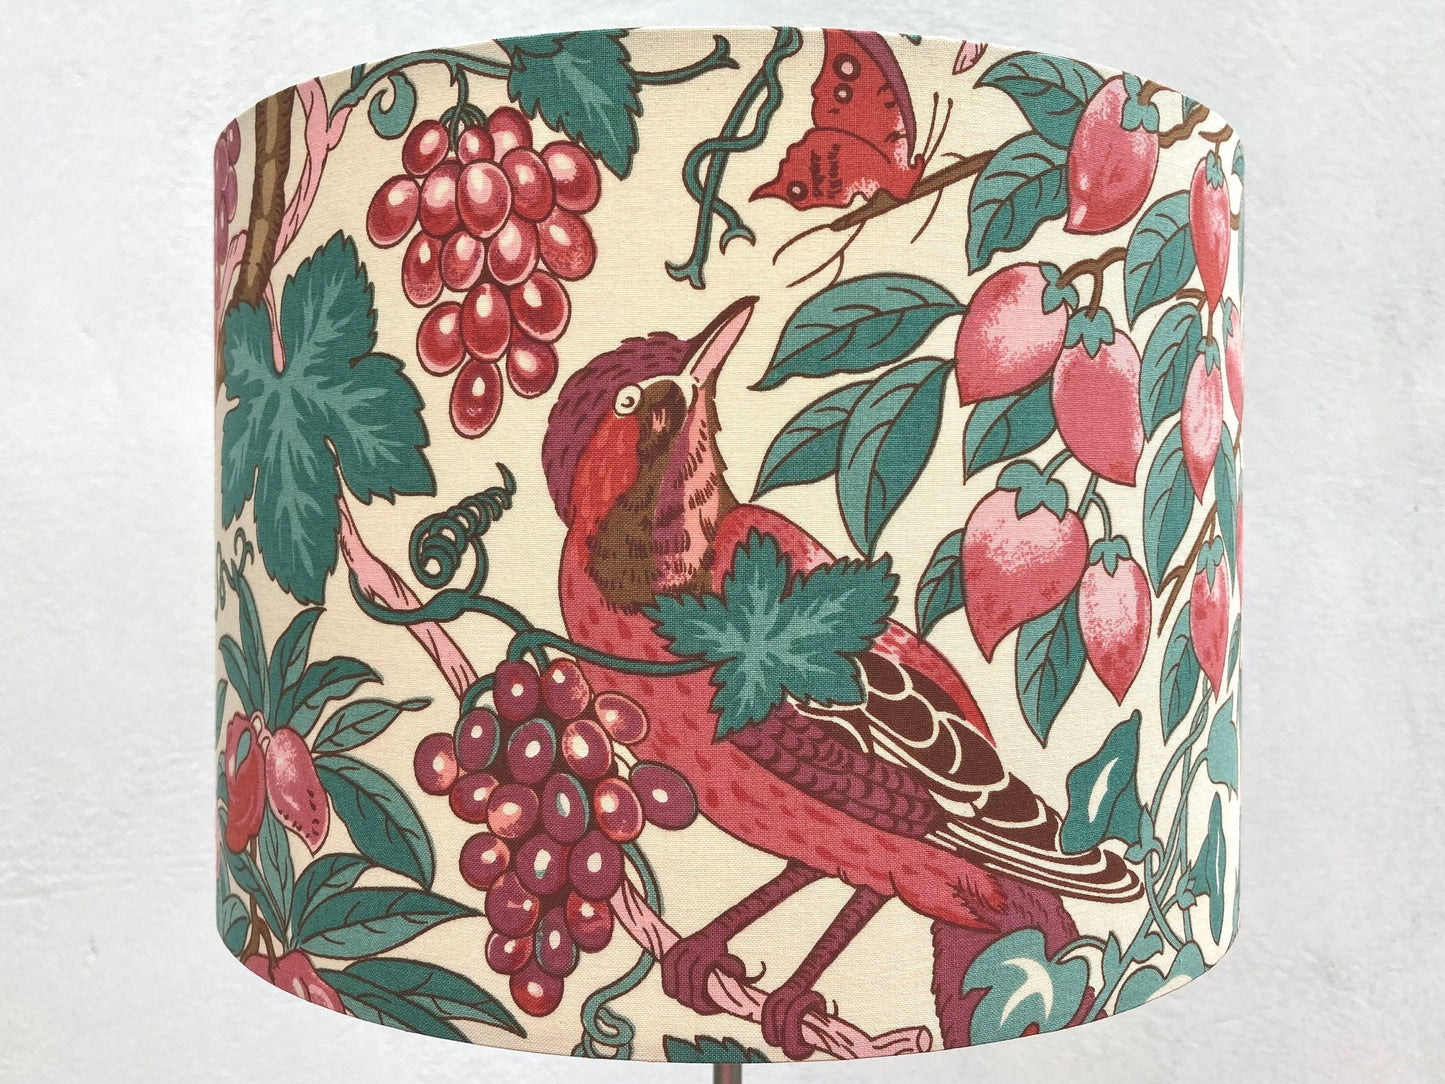 Liberty Melrose Lampshade - Vintage Birds and Fruit Fabric - Handmade Table or Ceiling Lamp